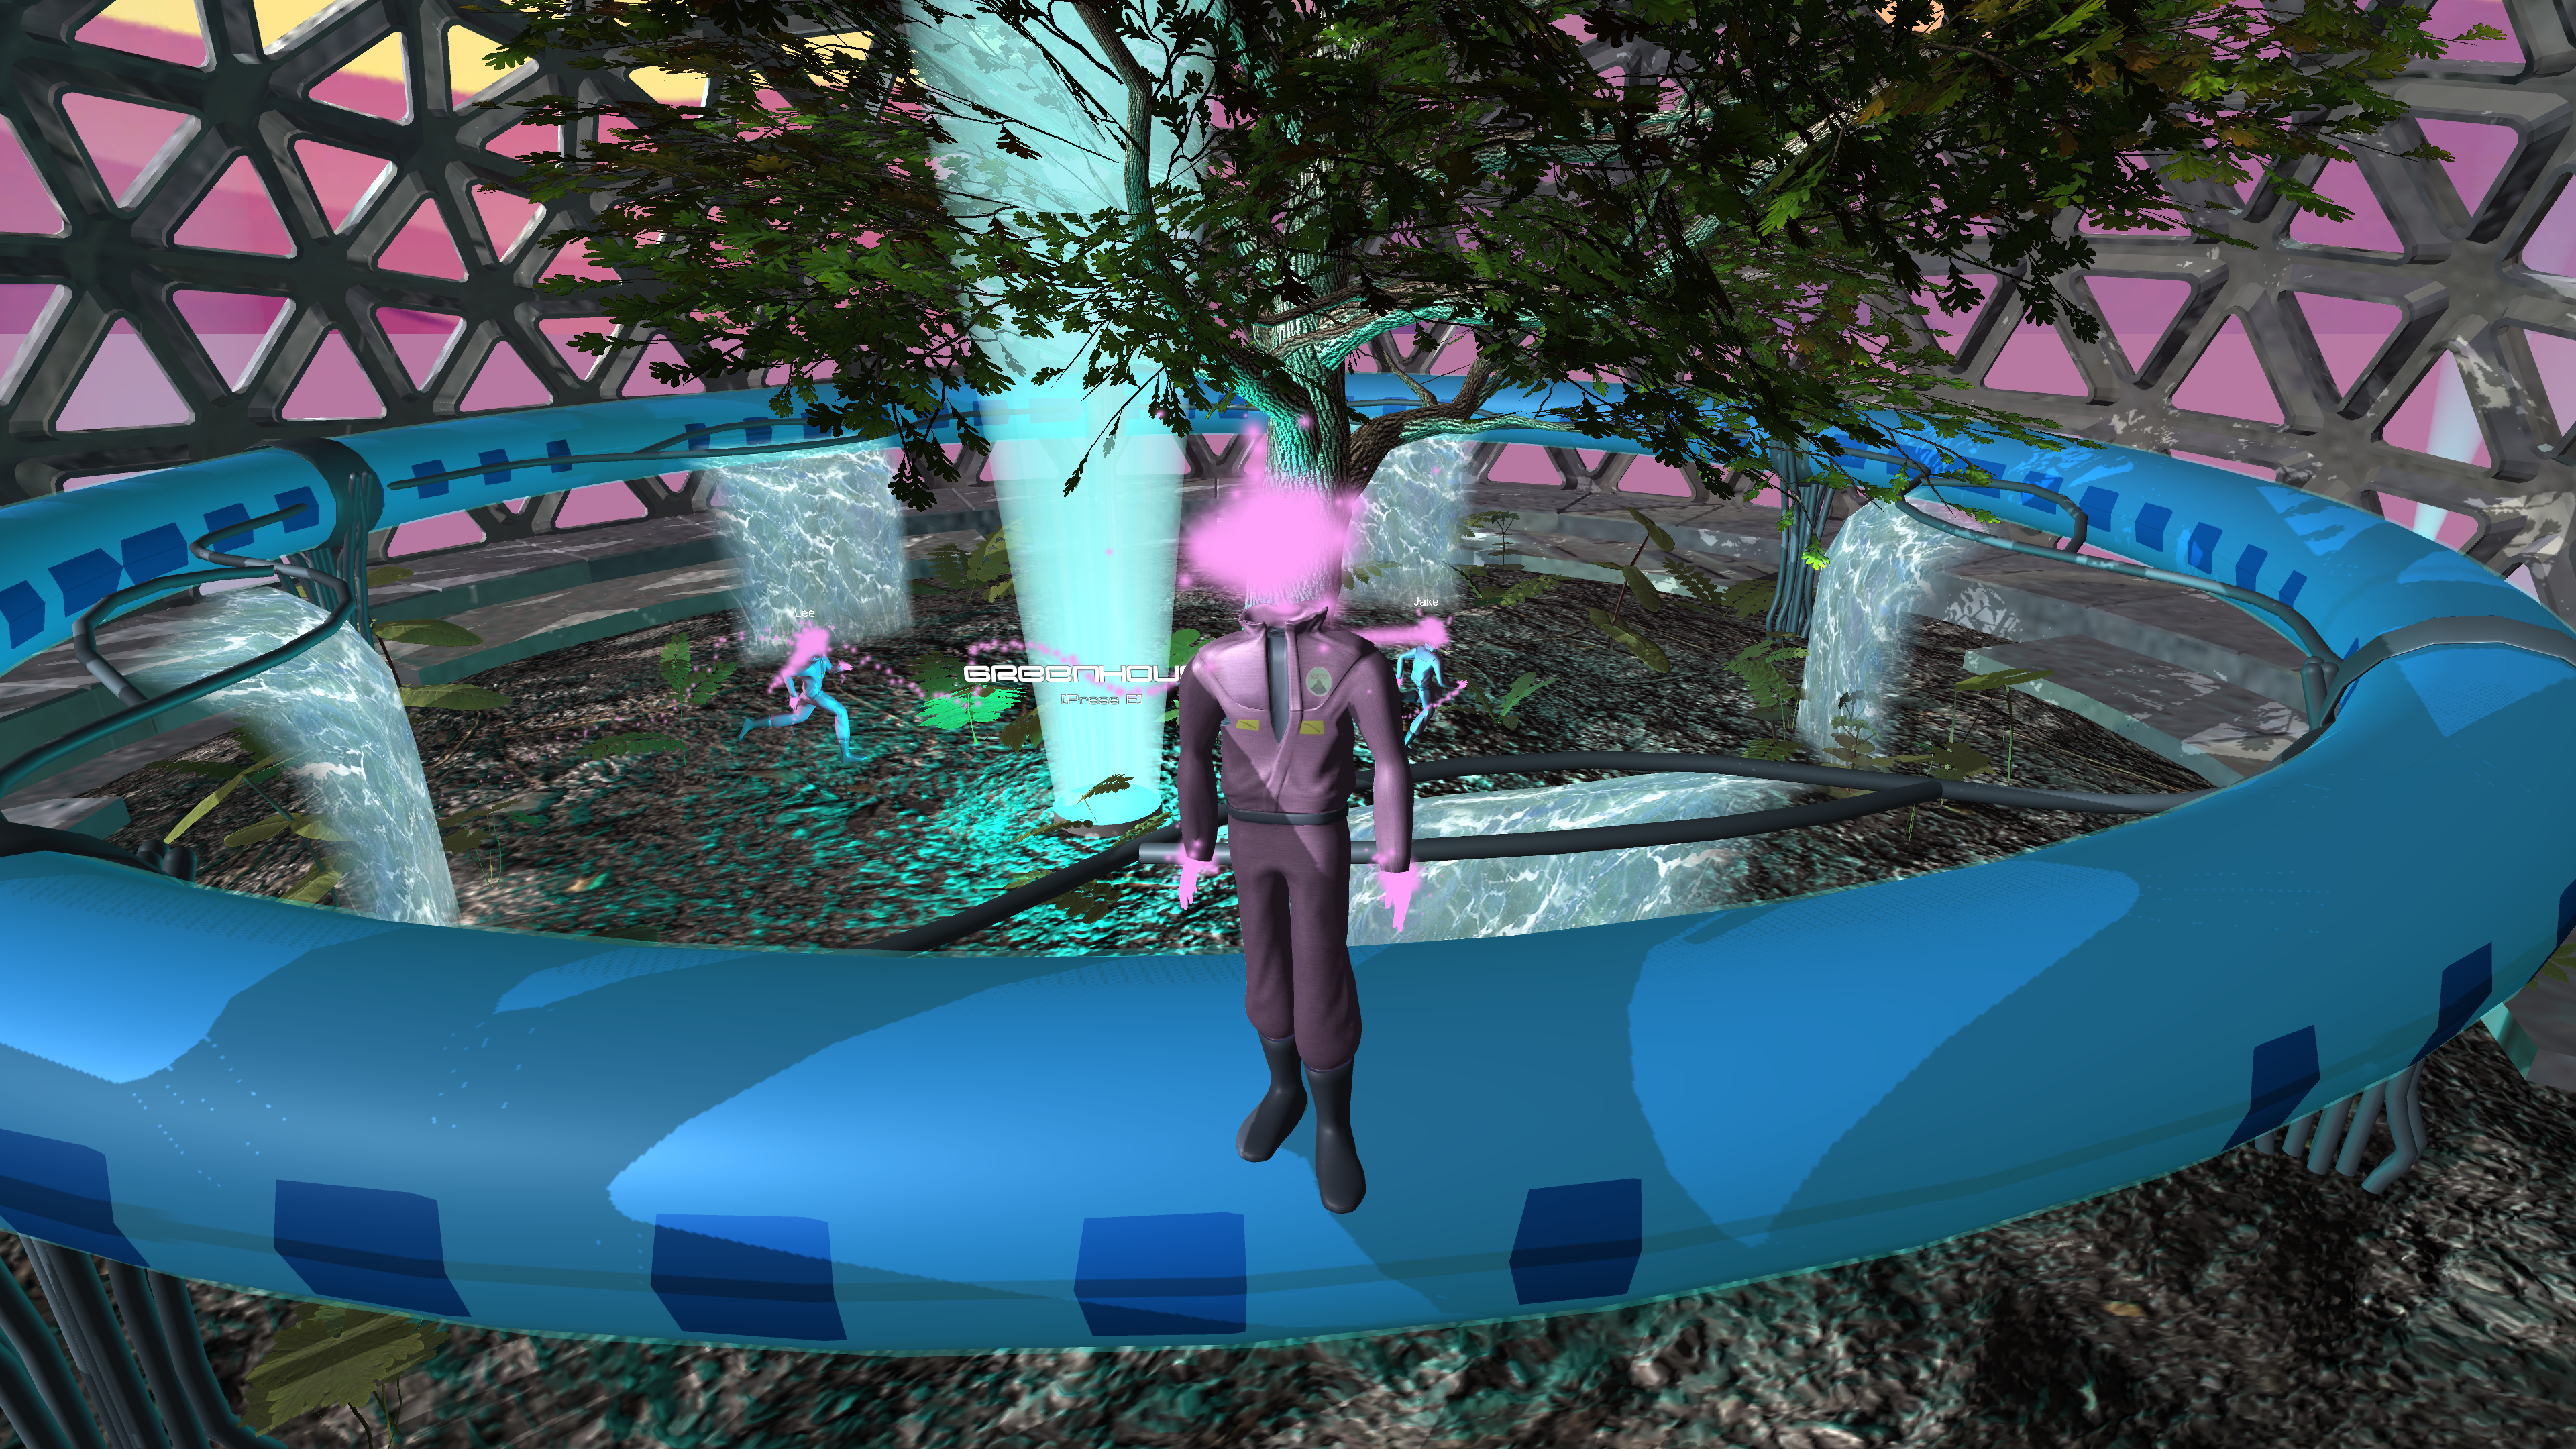 A digital rendering of a violet, spirit-like figure, wearing a lavender jumpsuit and having a cloud of smoke in place of a head, stands amidst a sci-fi environment within a large geodesic dome. Also inside the dome is a large tree, a blue tunnel, and two more figures running across the land.